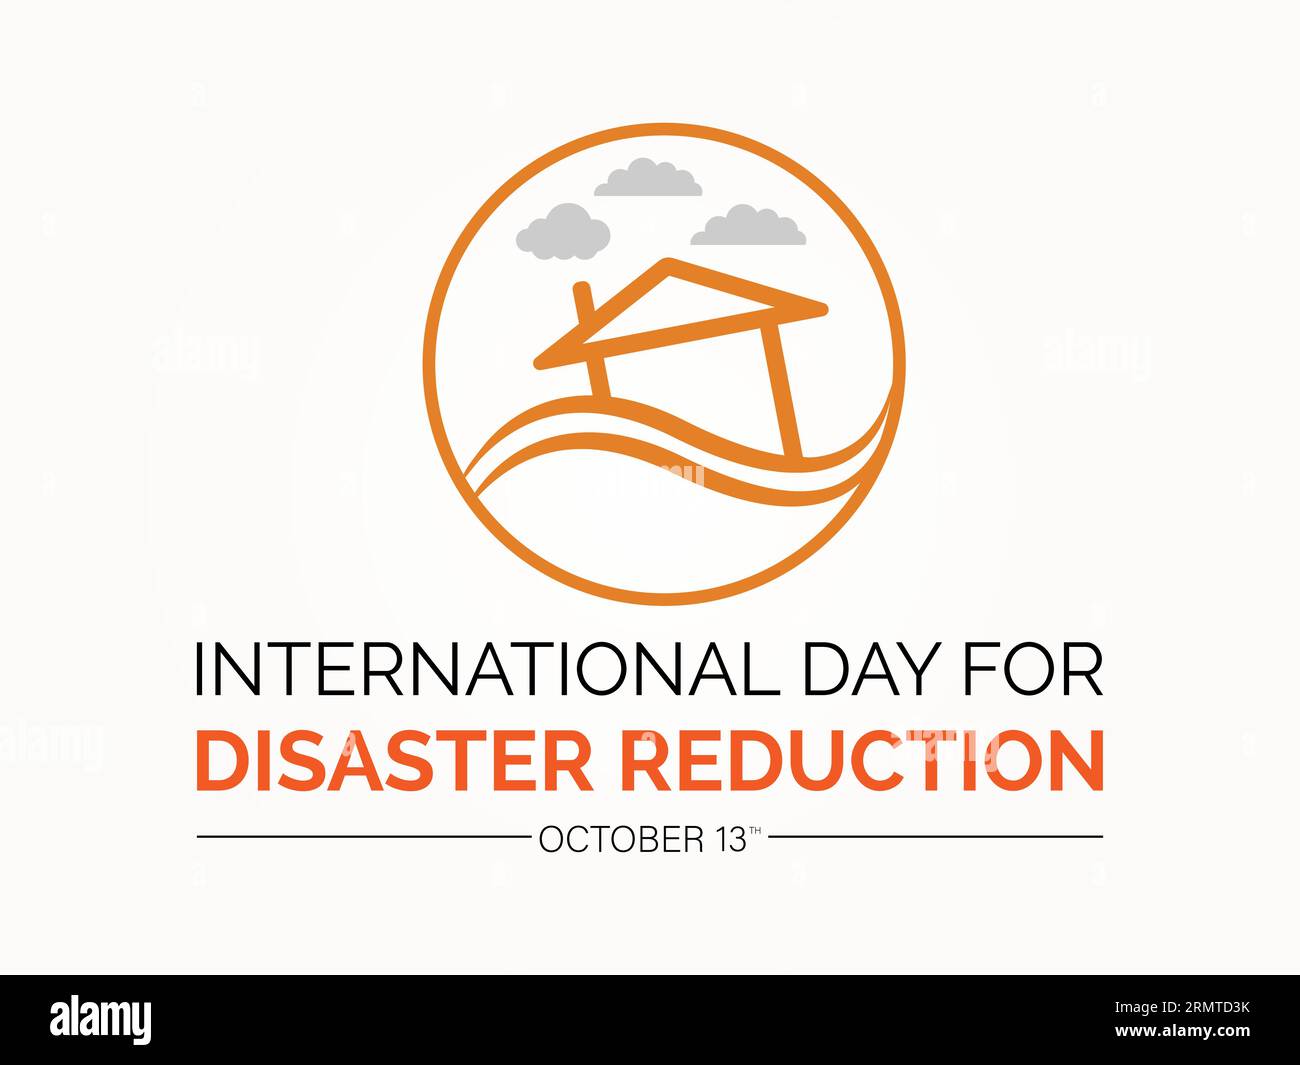 International Day for Disaster Reduction Focuses on Mitigation, Preparedness, and Sustainable Recovery. Building Resilience and Safety Globally Vector Stock Vector